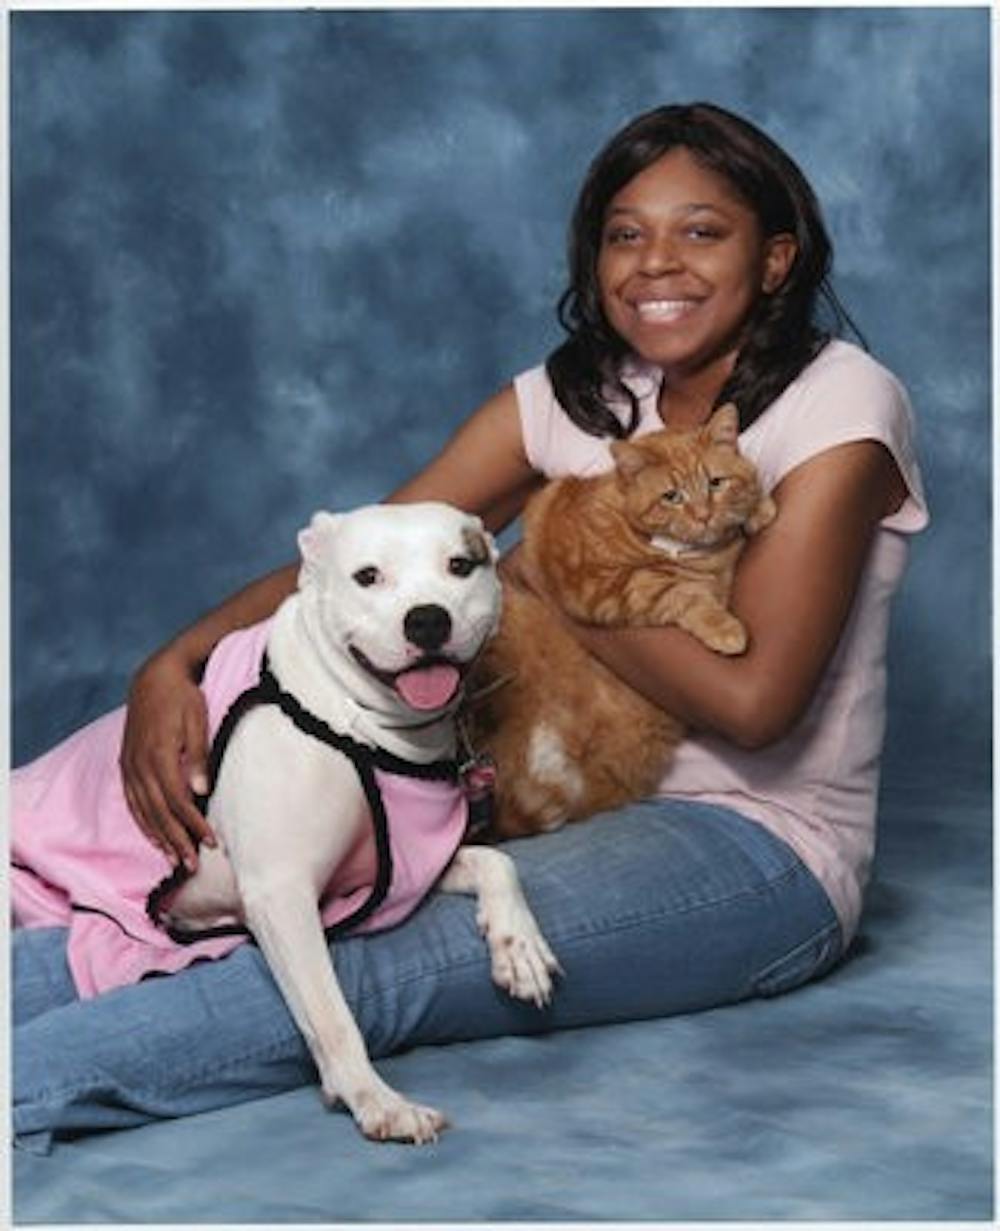 April Dixon, freshman in animal science, sits with her dog Crystal and cat Mr. Whiskers, who she credits with helping her control her paranoid schizophrenia. (Contributed by April Dixon)